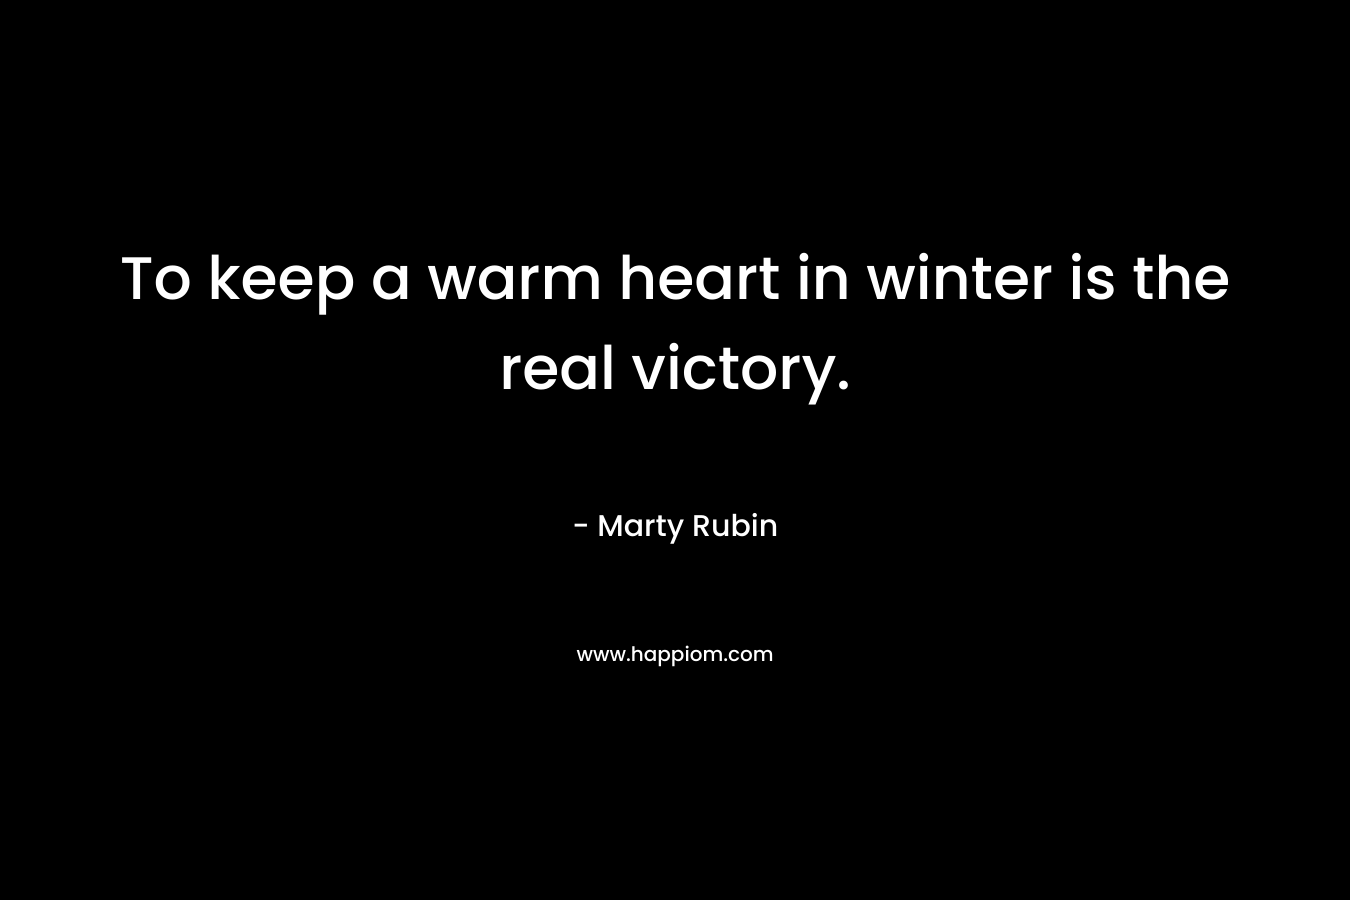 To keep a warm heart in winter is the real victory.